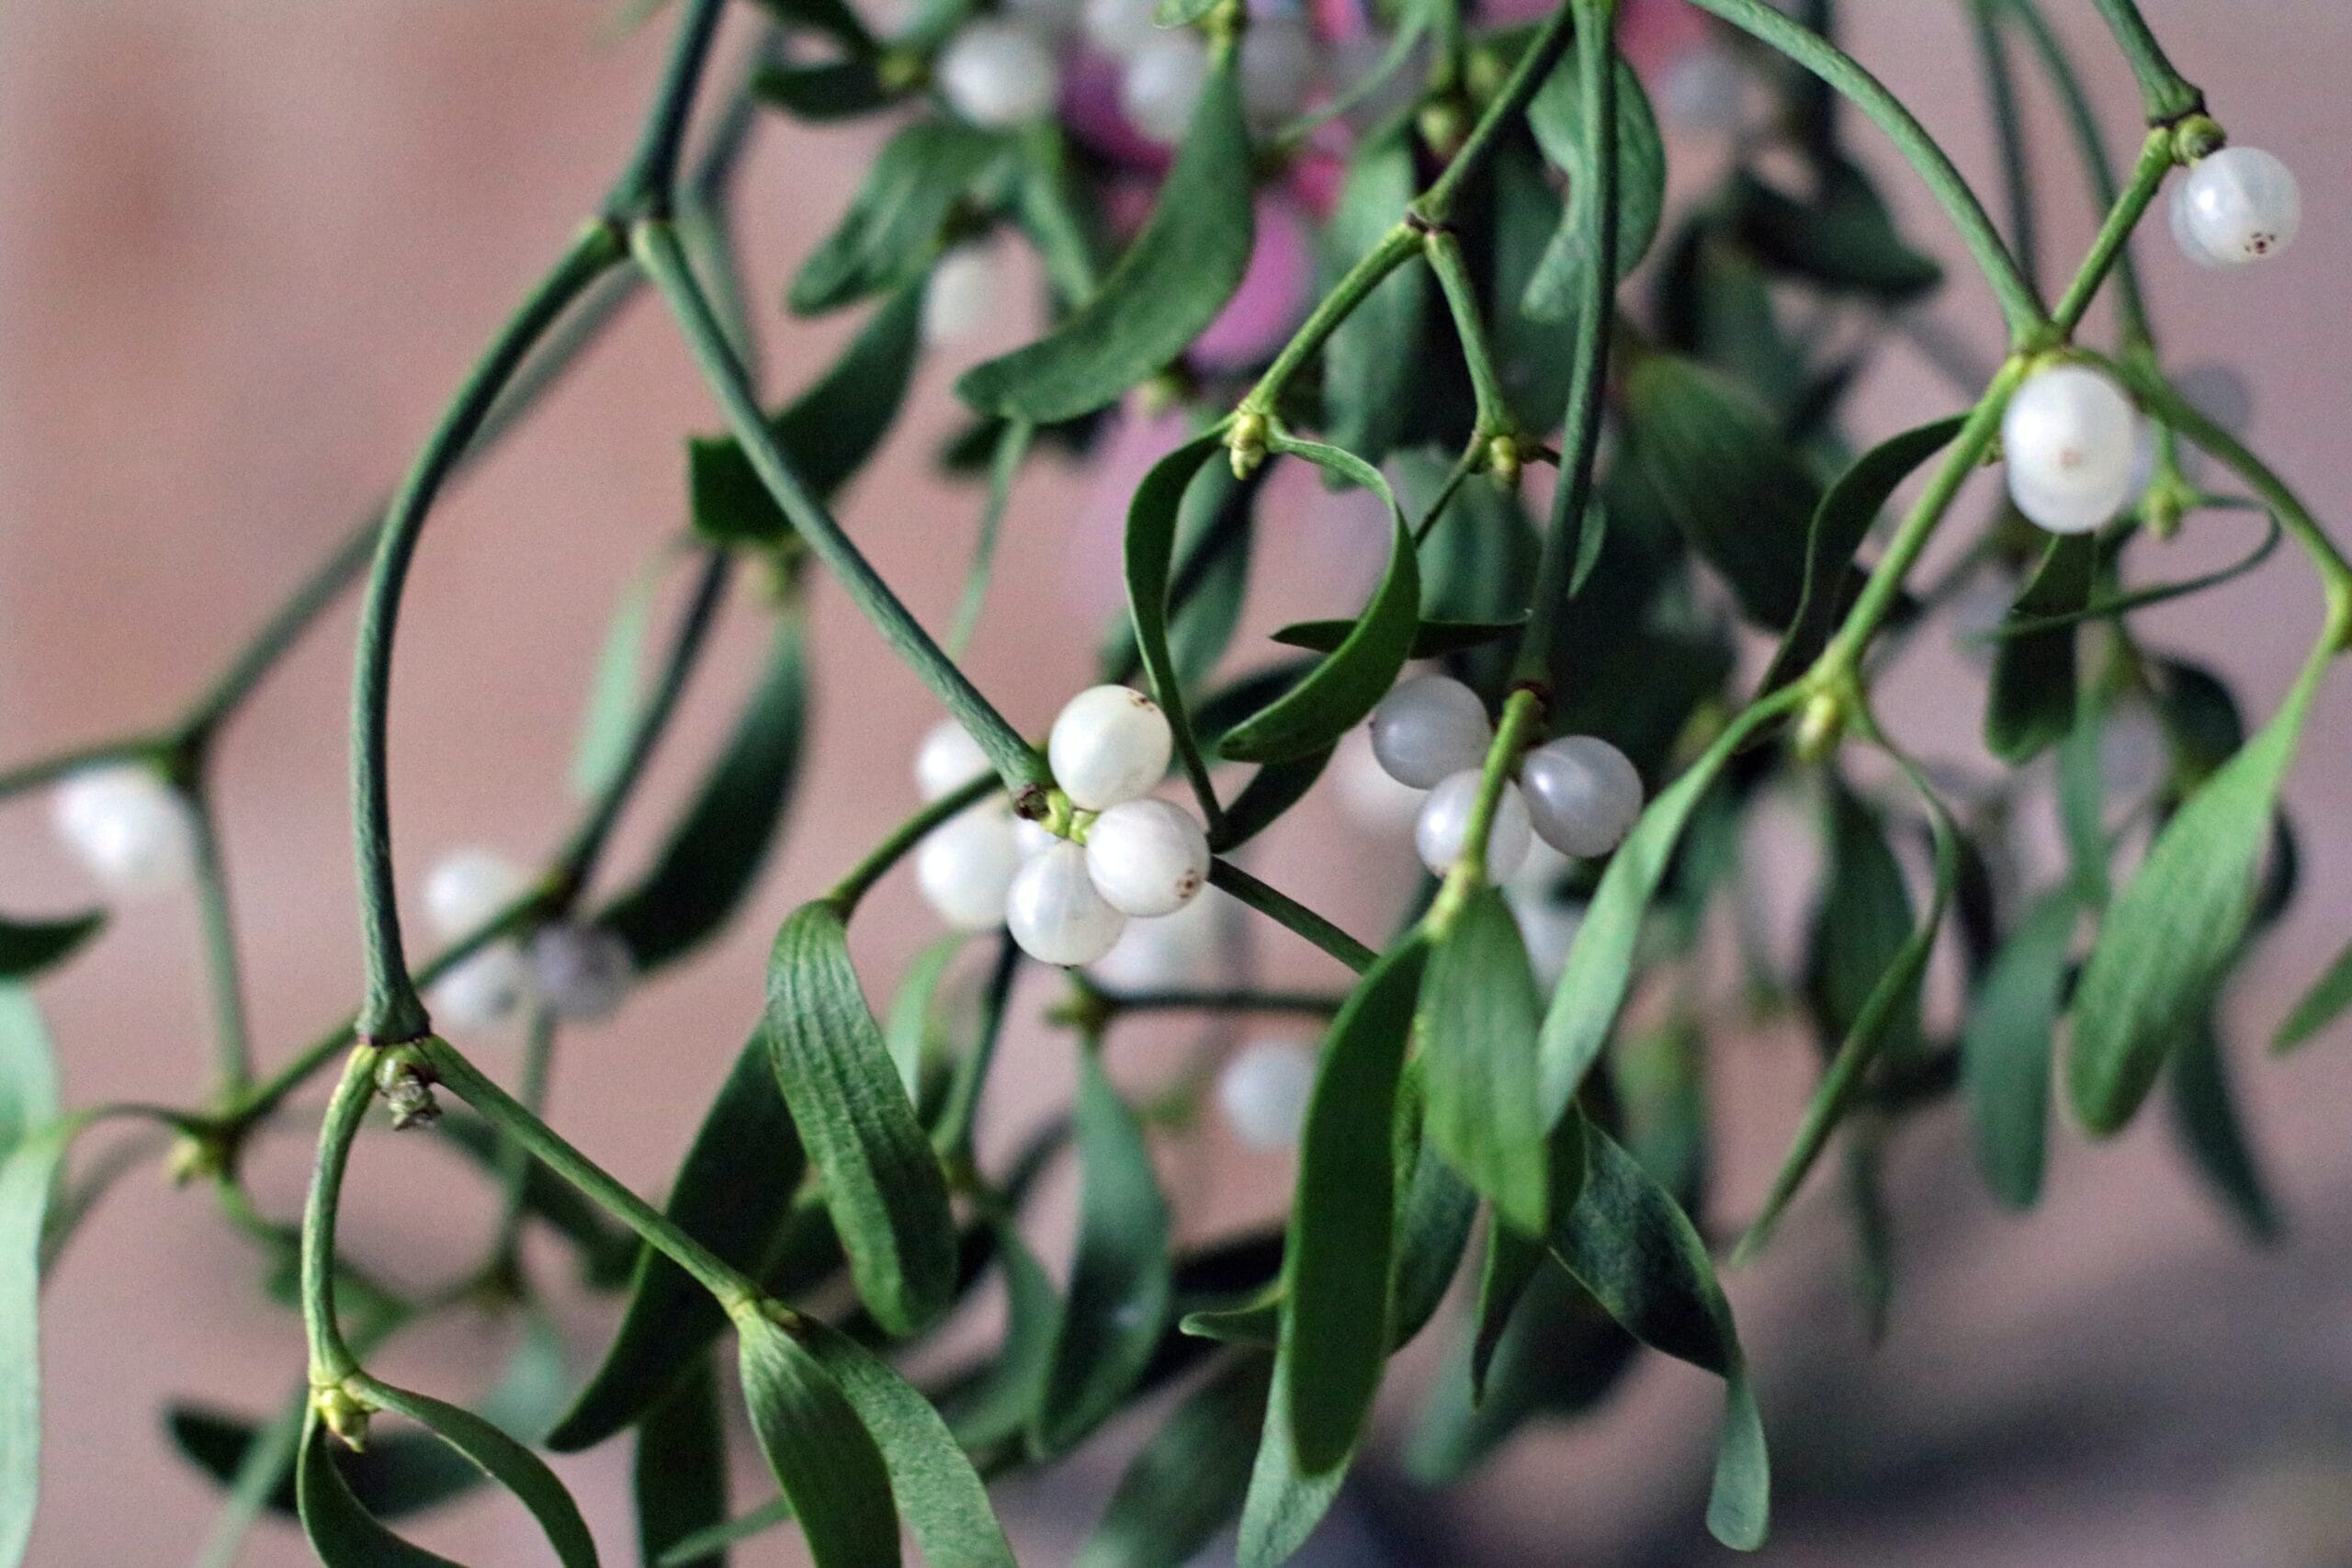 6.    What is the colour of a mistletoe berry?